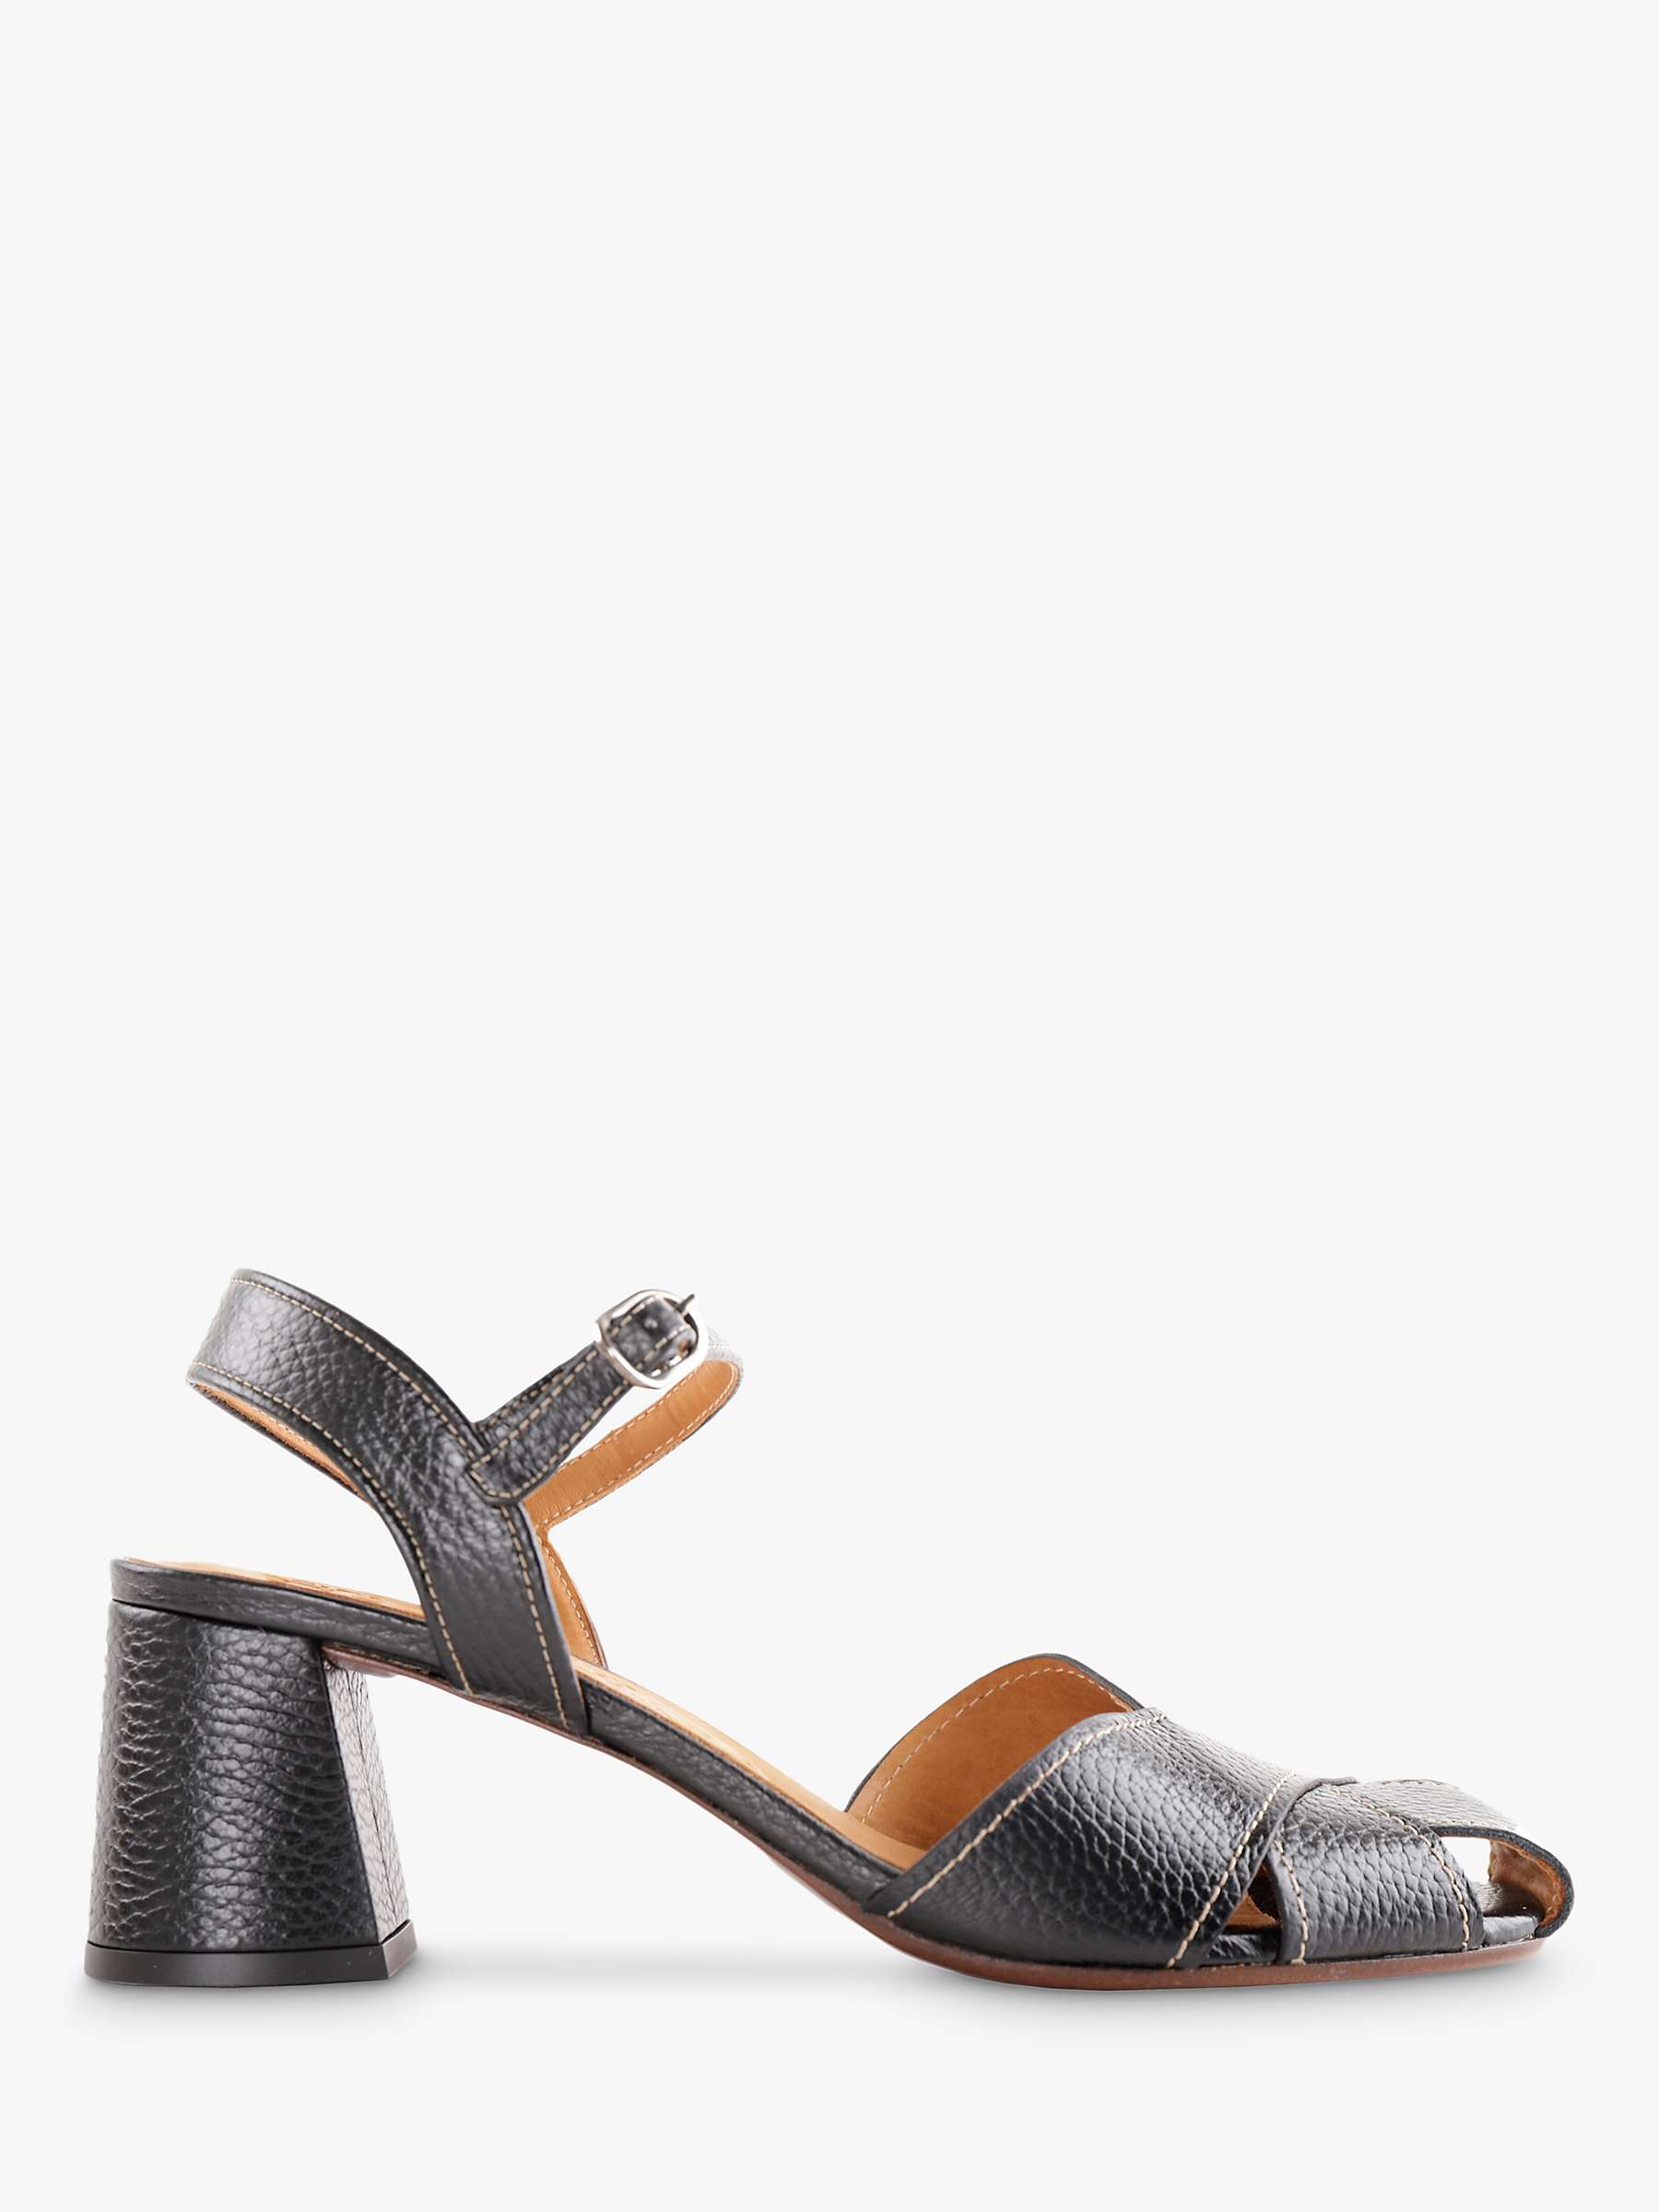 Buy Chie Mihara Roley Leather Sandals, Black Online at johnlewis.com